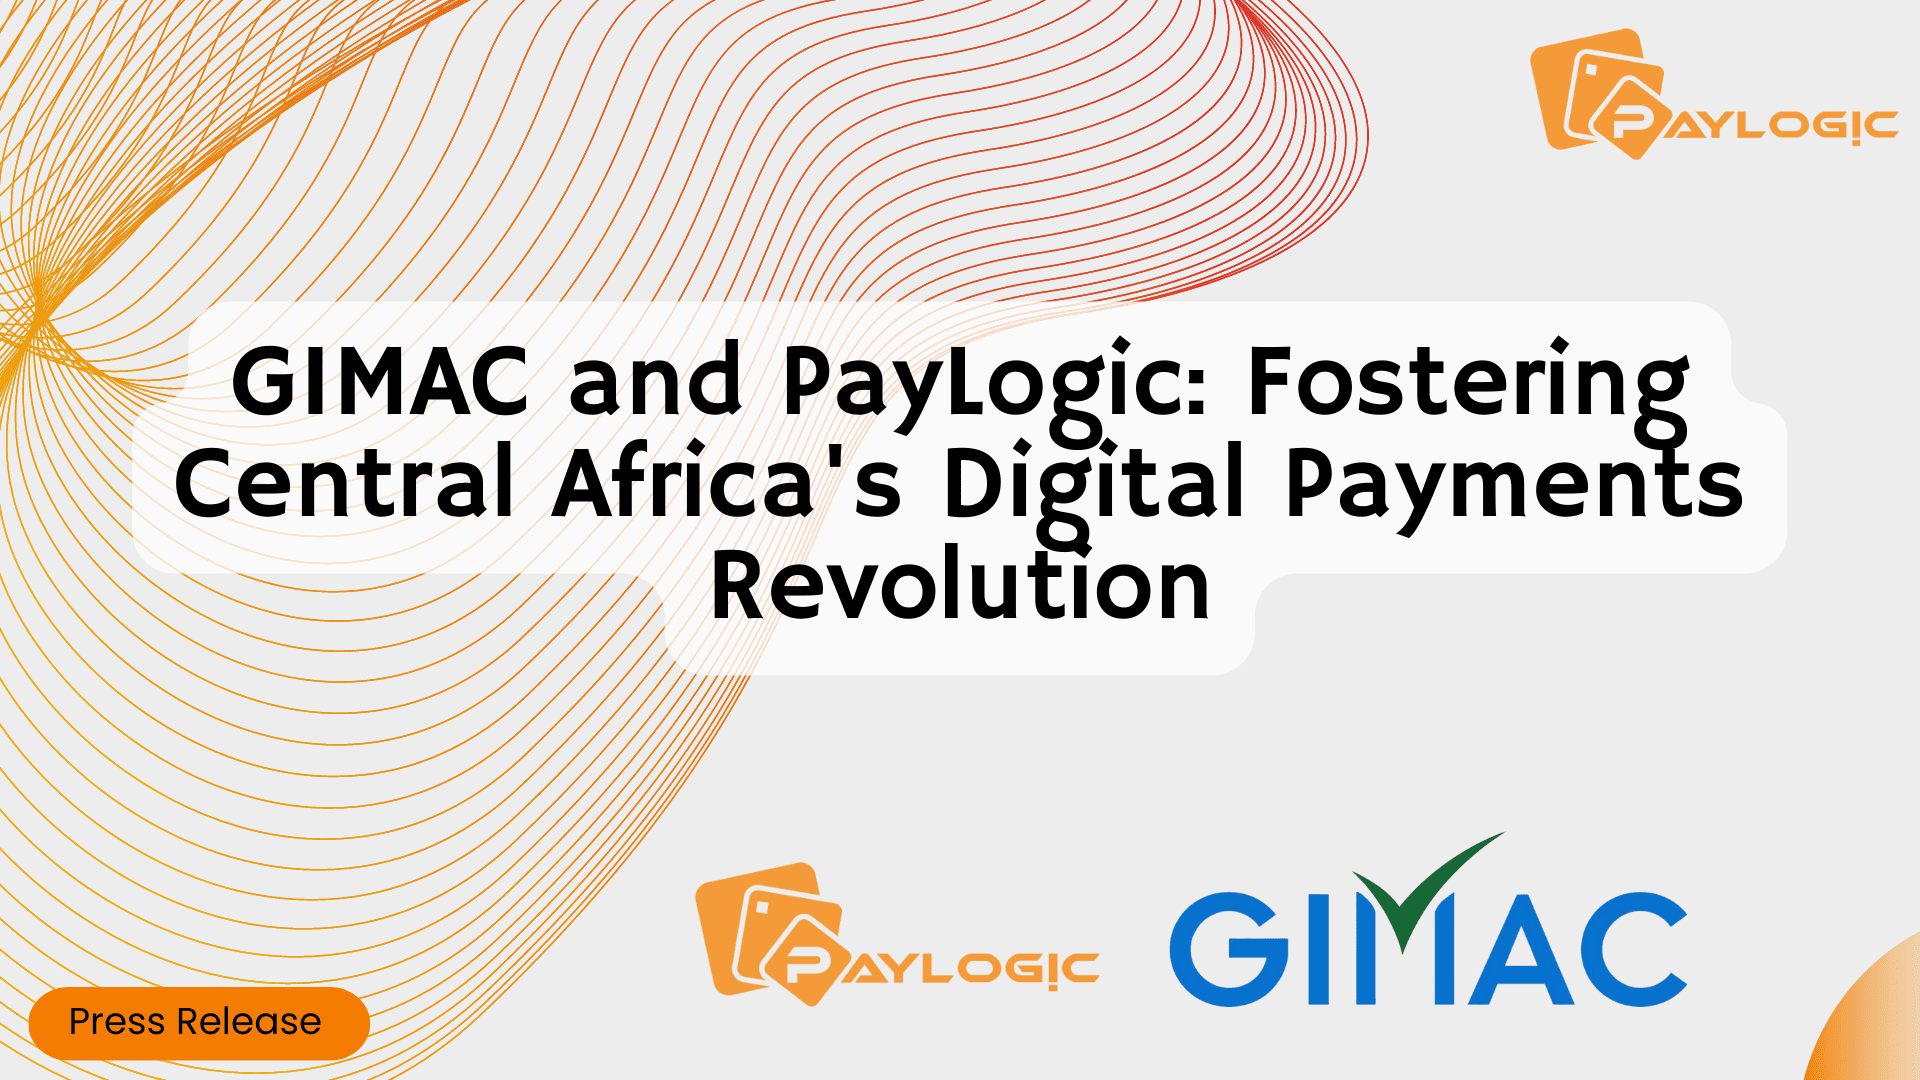 GIMAC and PayLogic: Fostering Central Africa’s Digital Payments Revolution